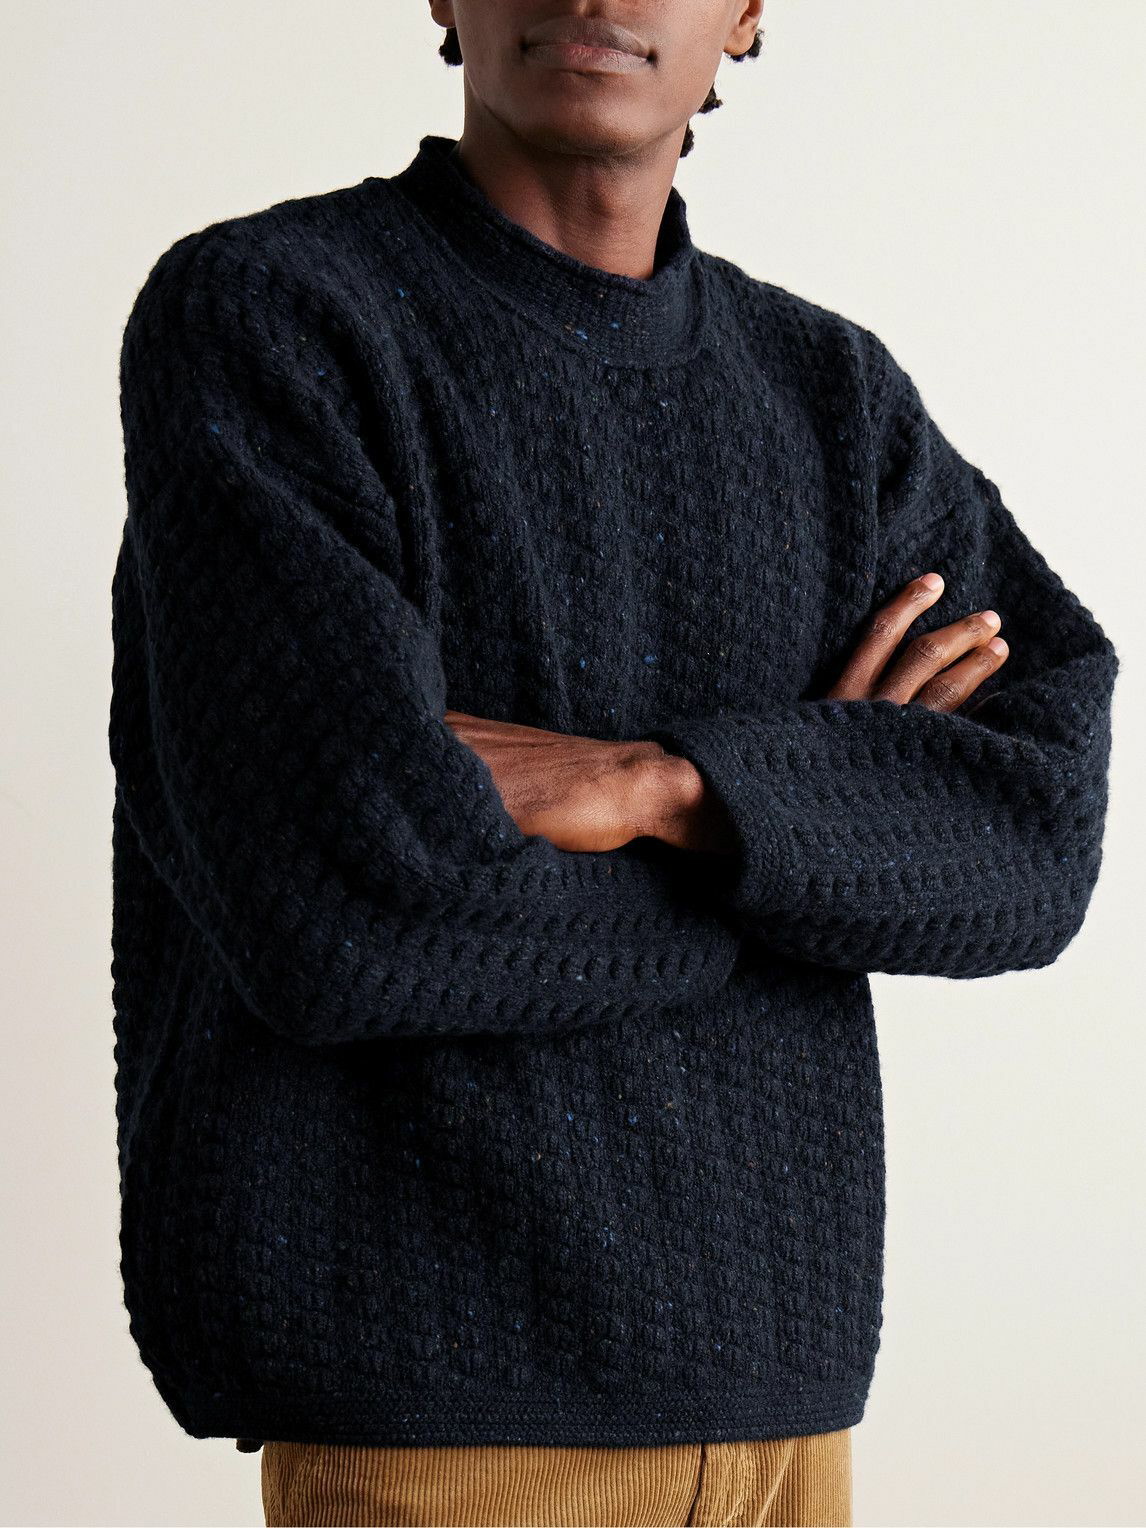 Inis Meáin - Donegal Merino Wool and Cashmere-Blend Mock-Neck Sweater ...